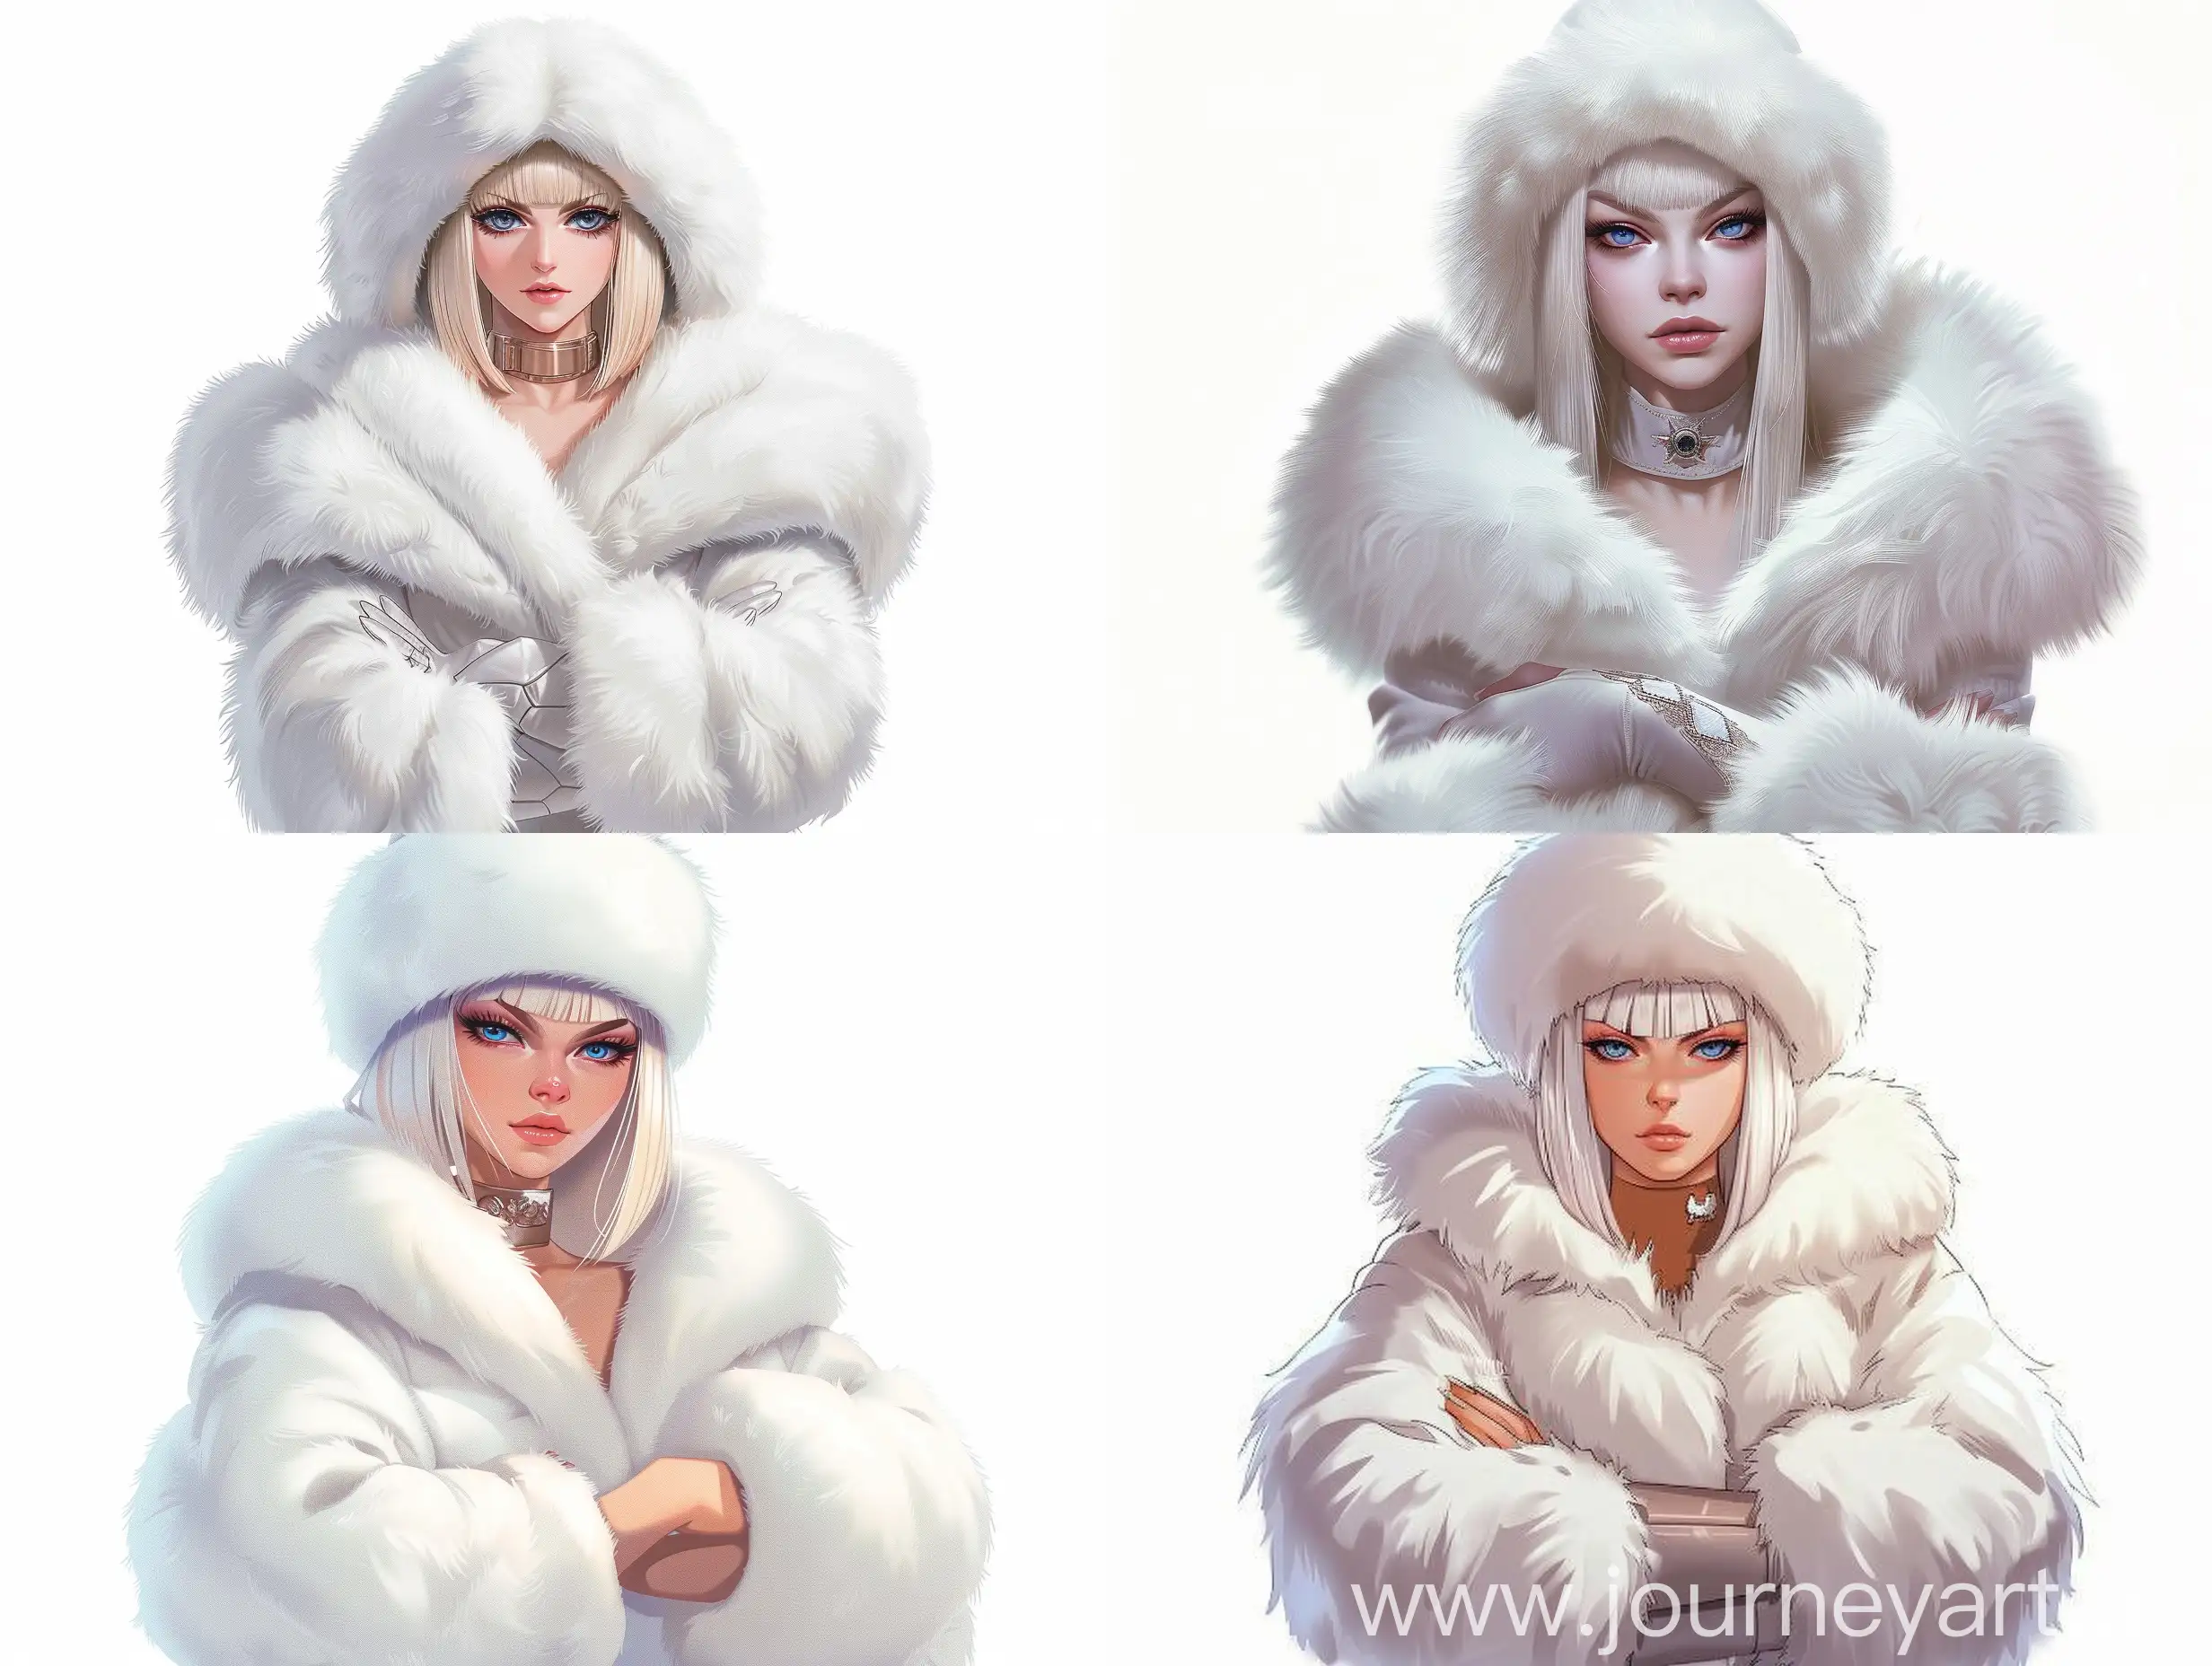 Confident-Russian-Woman-in-White-Fur-Coat-Anime-Style-Concept-Art